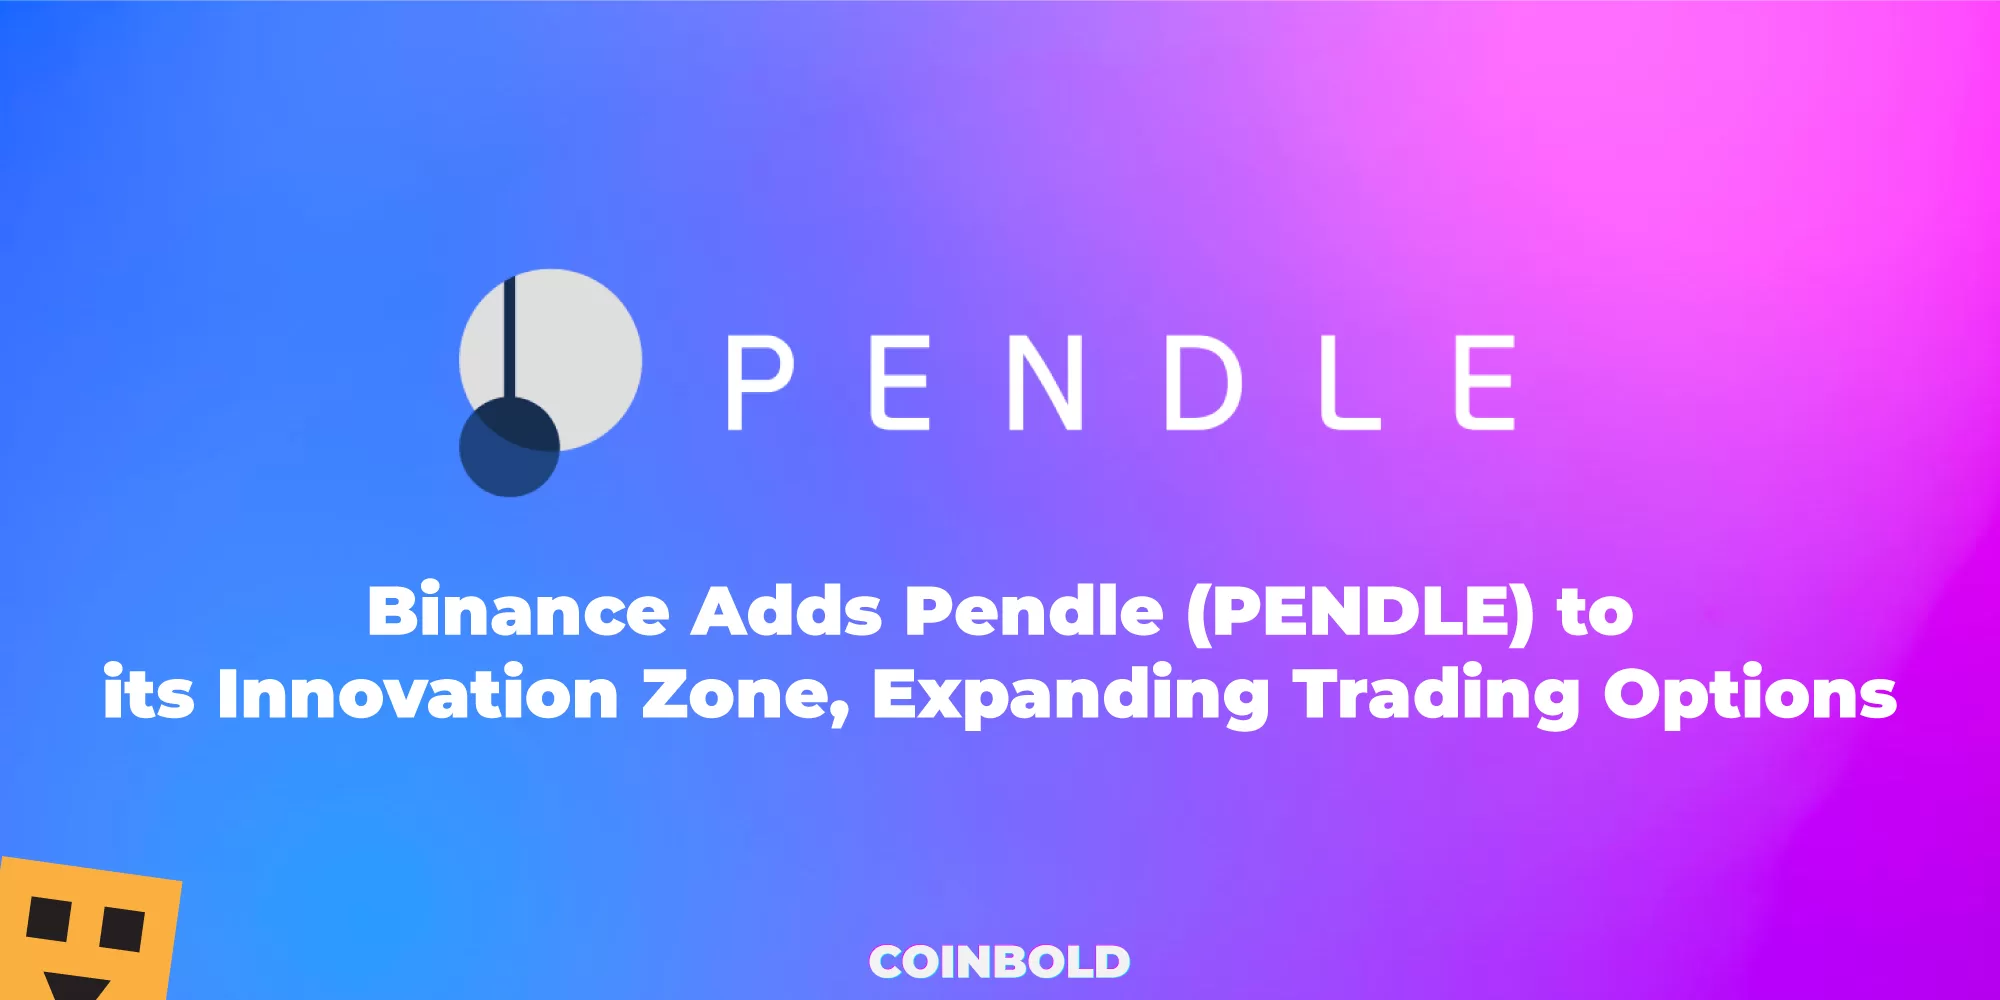 Binance Adds Pendle (PENDLE) to its Innovation Zone, Expanding Trading Options